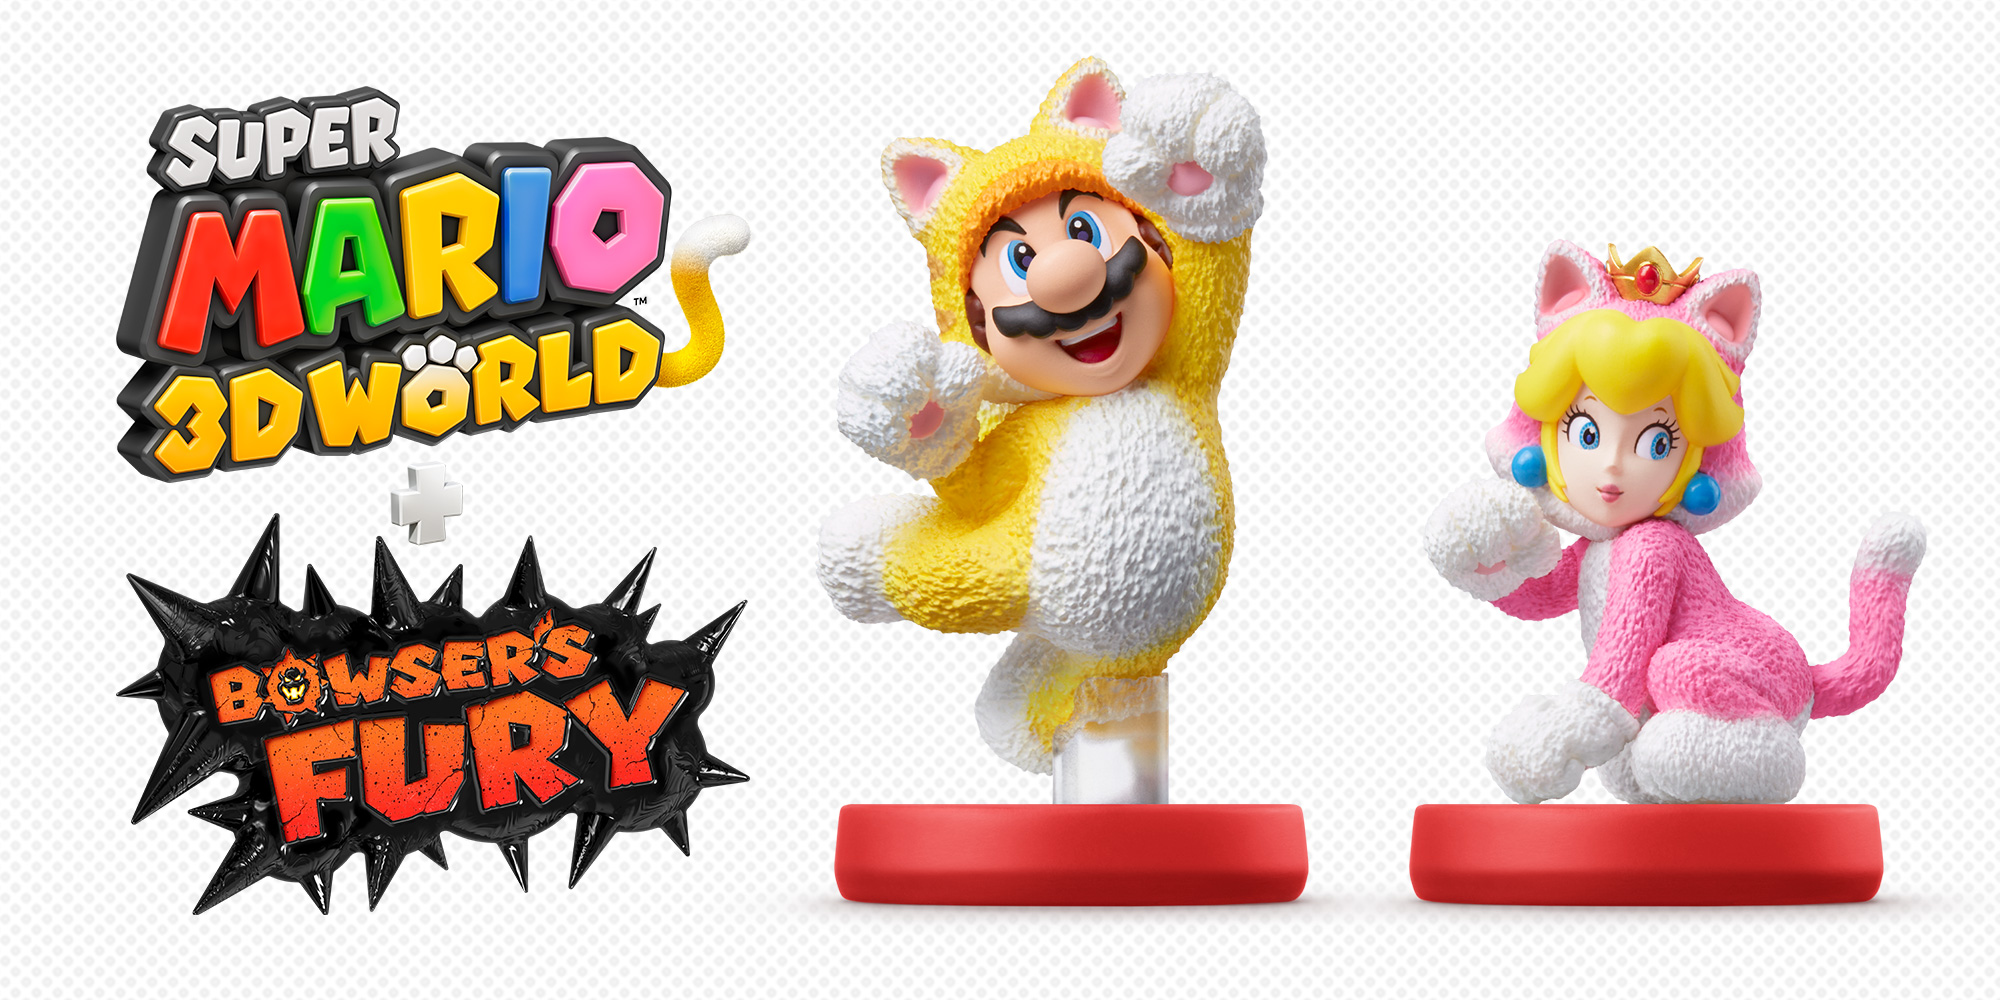 How to Use Amiibo in Super Mario 3D World + Bowser's Fury